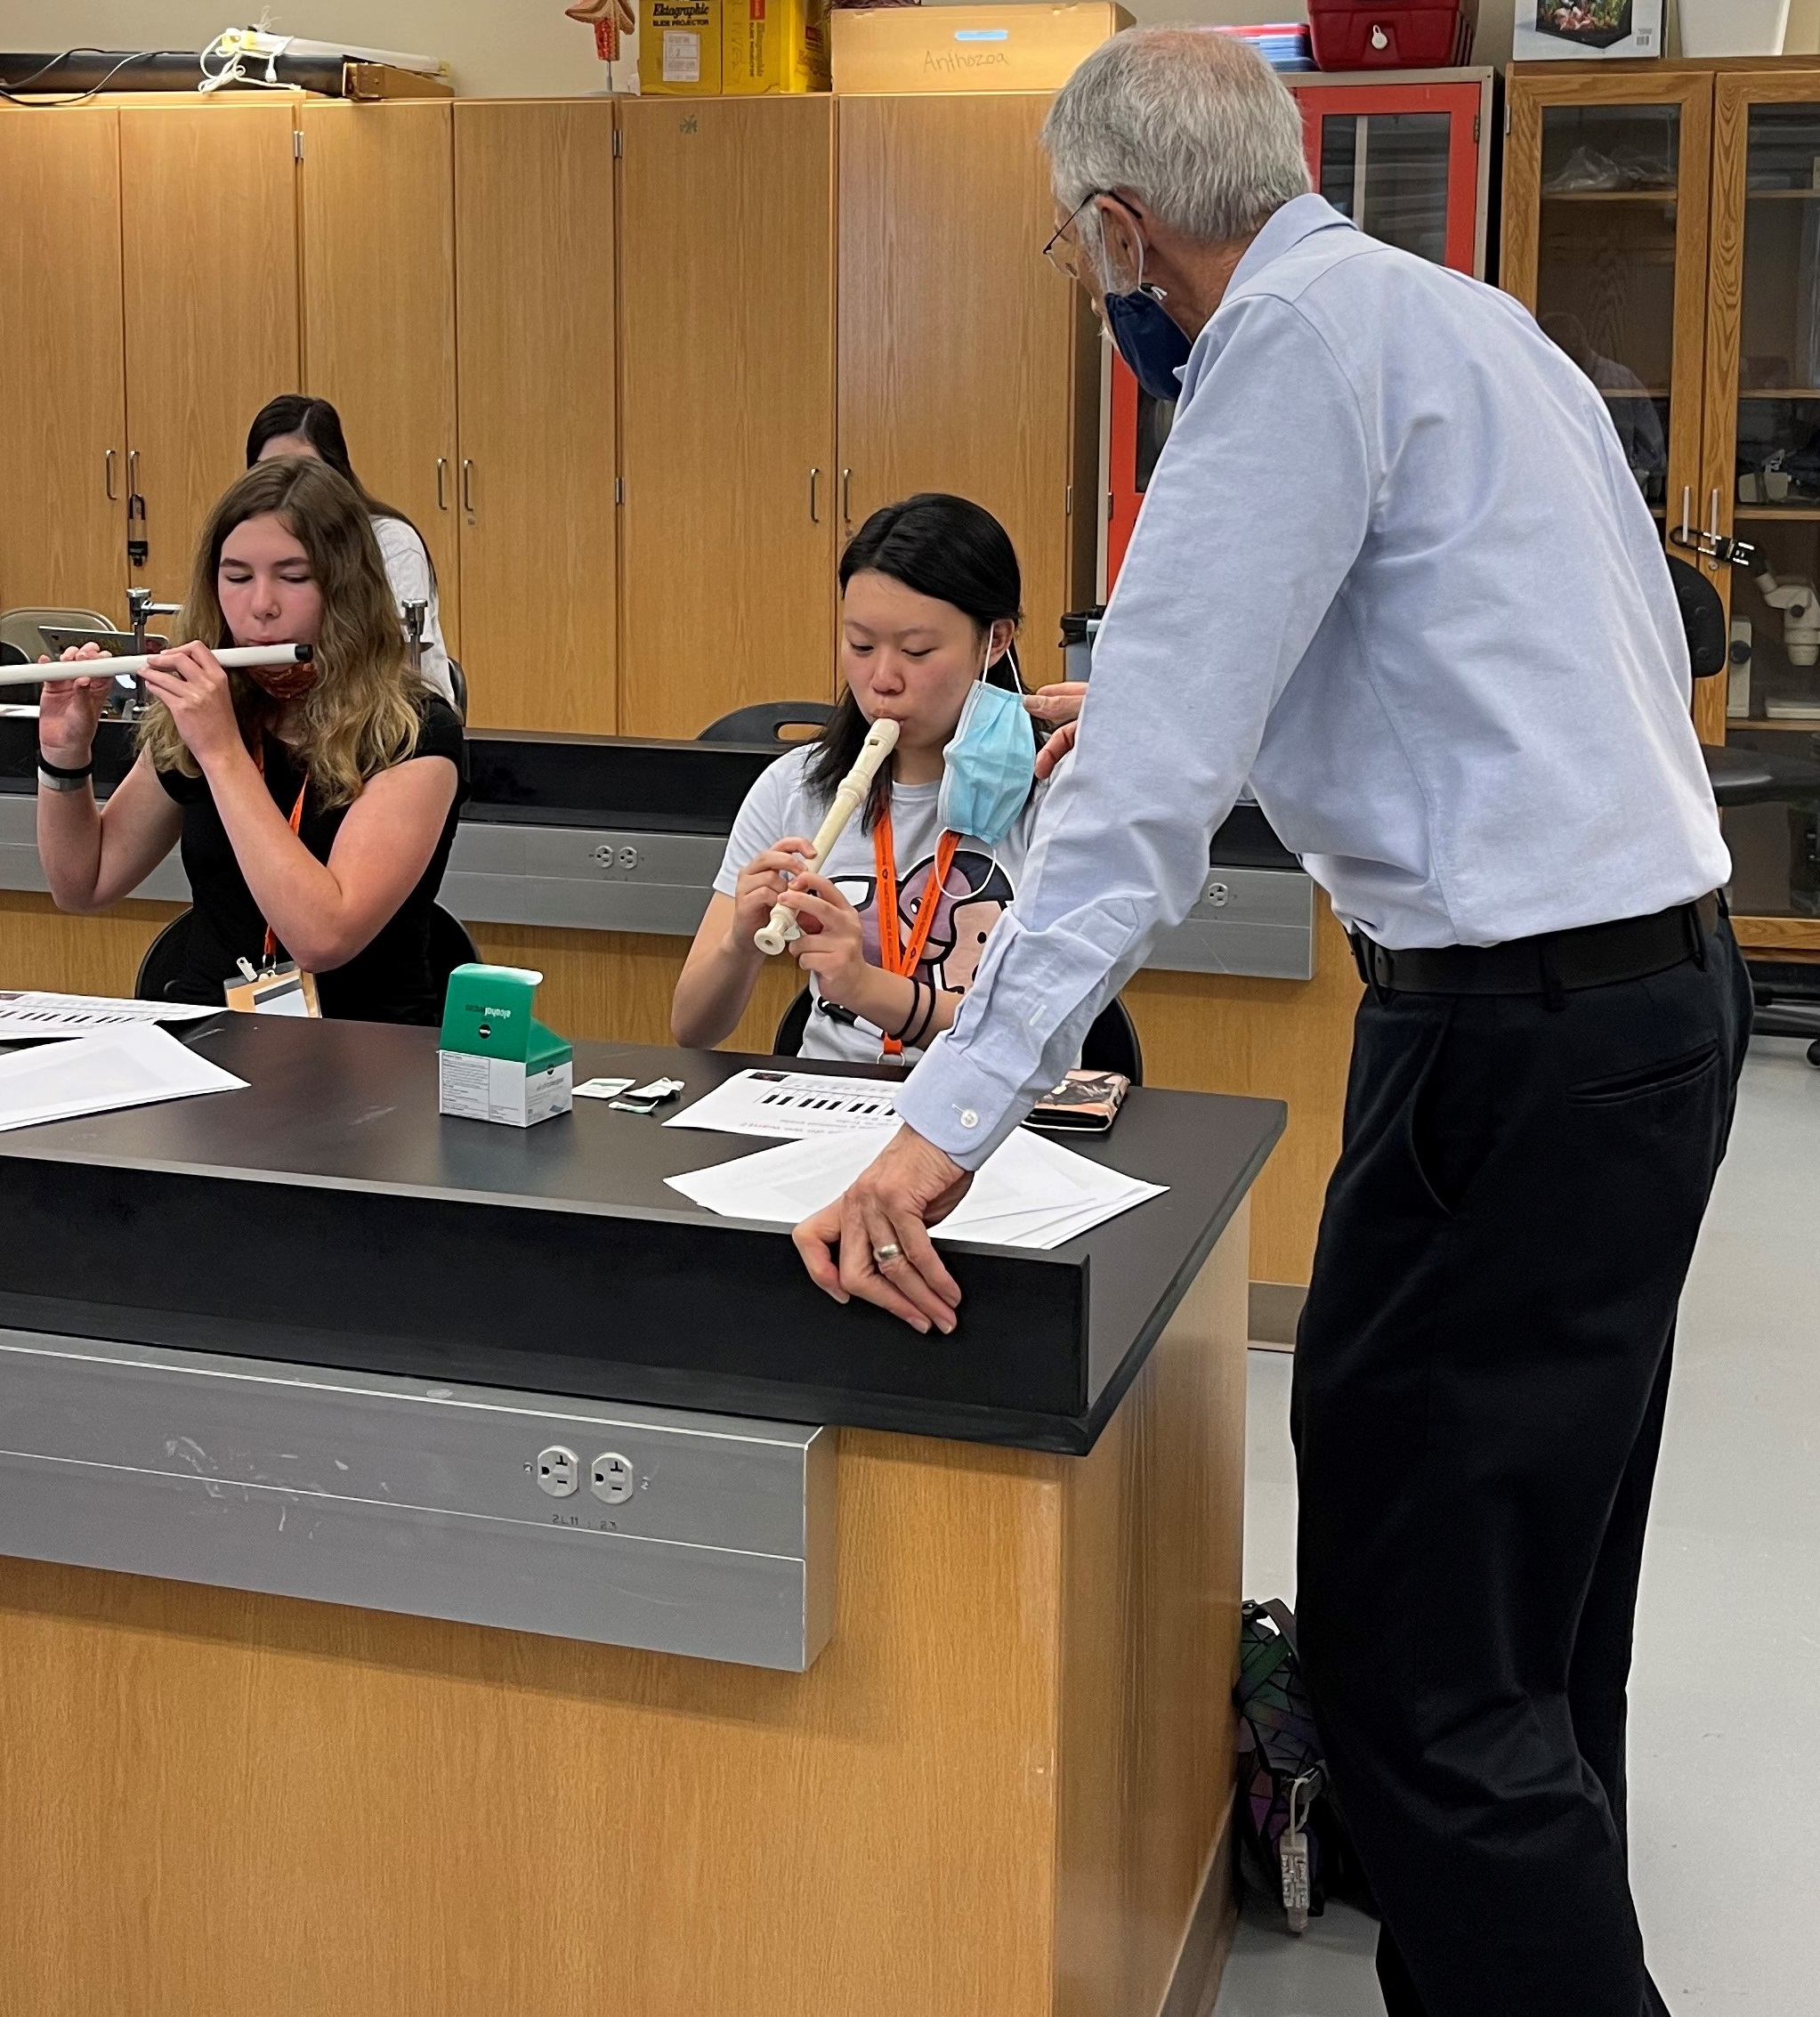 Dean Giordano discusses the musical notes recorders produce with Vicki Wang and Audrey Mcelroy.